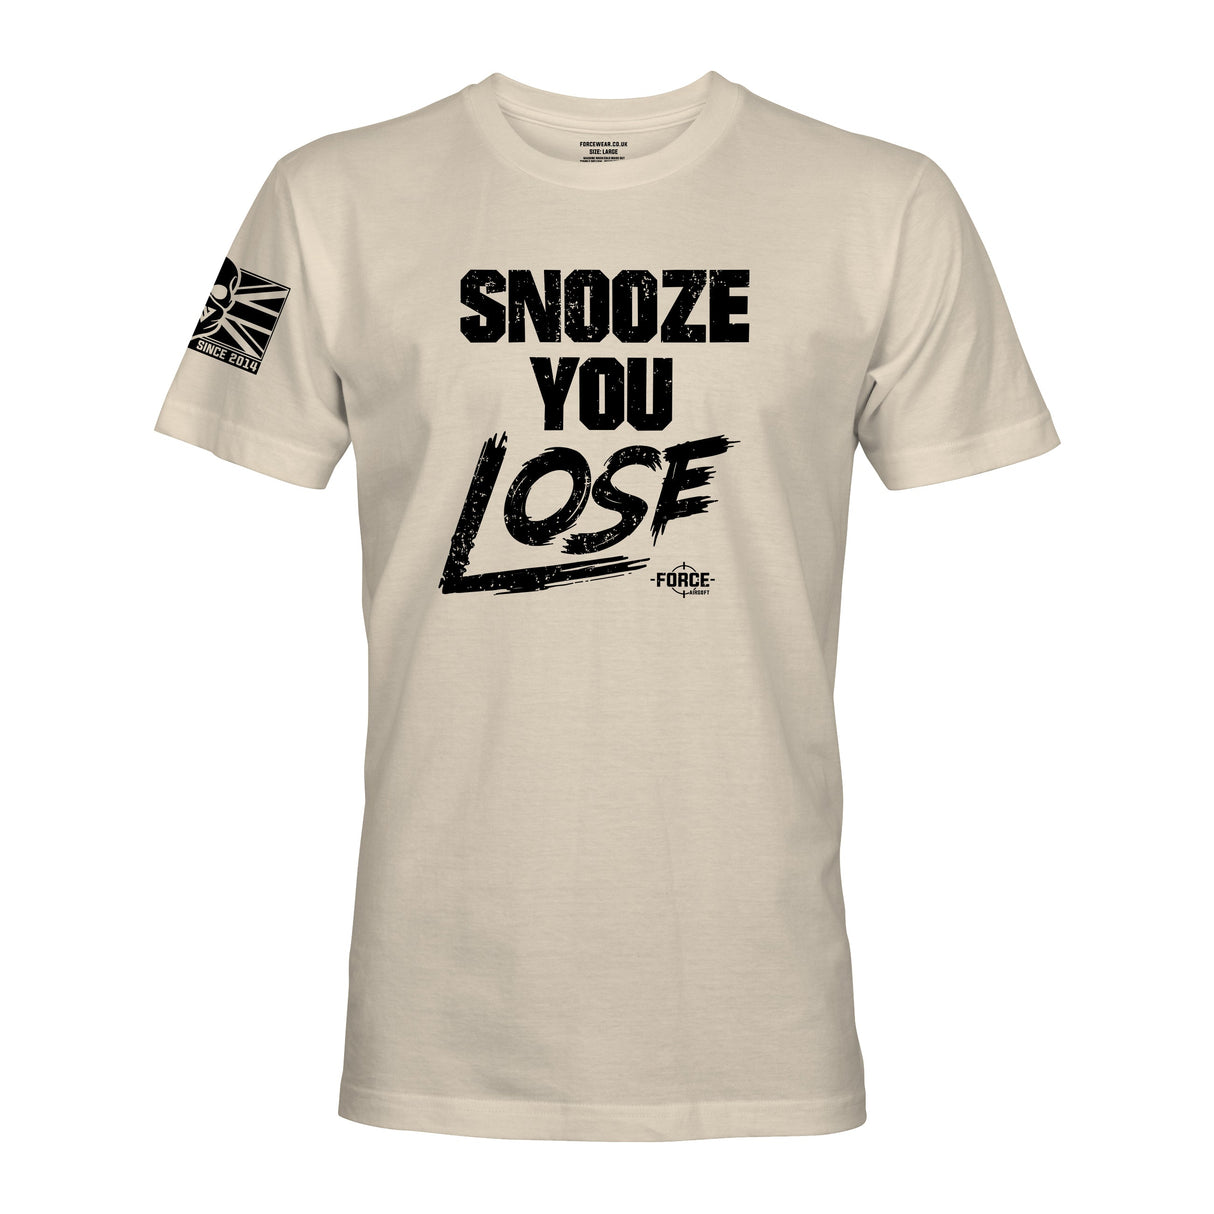 SNOOZE YOU LOSE! - Force Wear HQ - T-SHIRTS